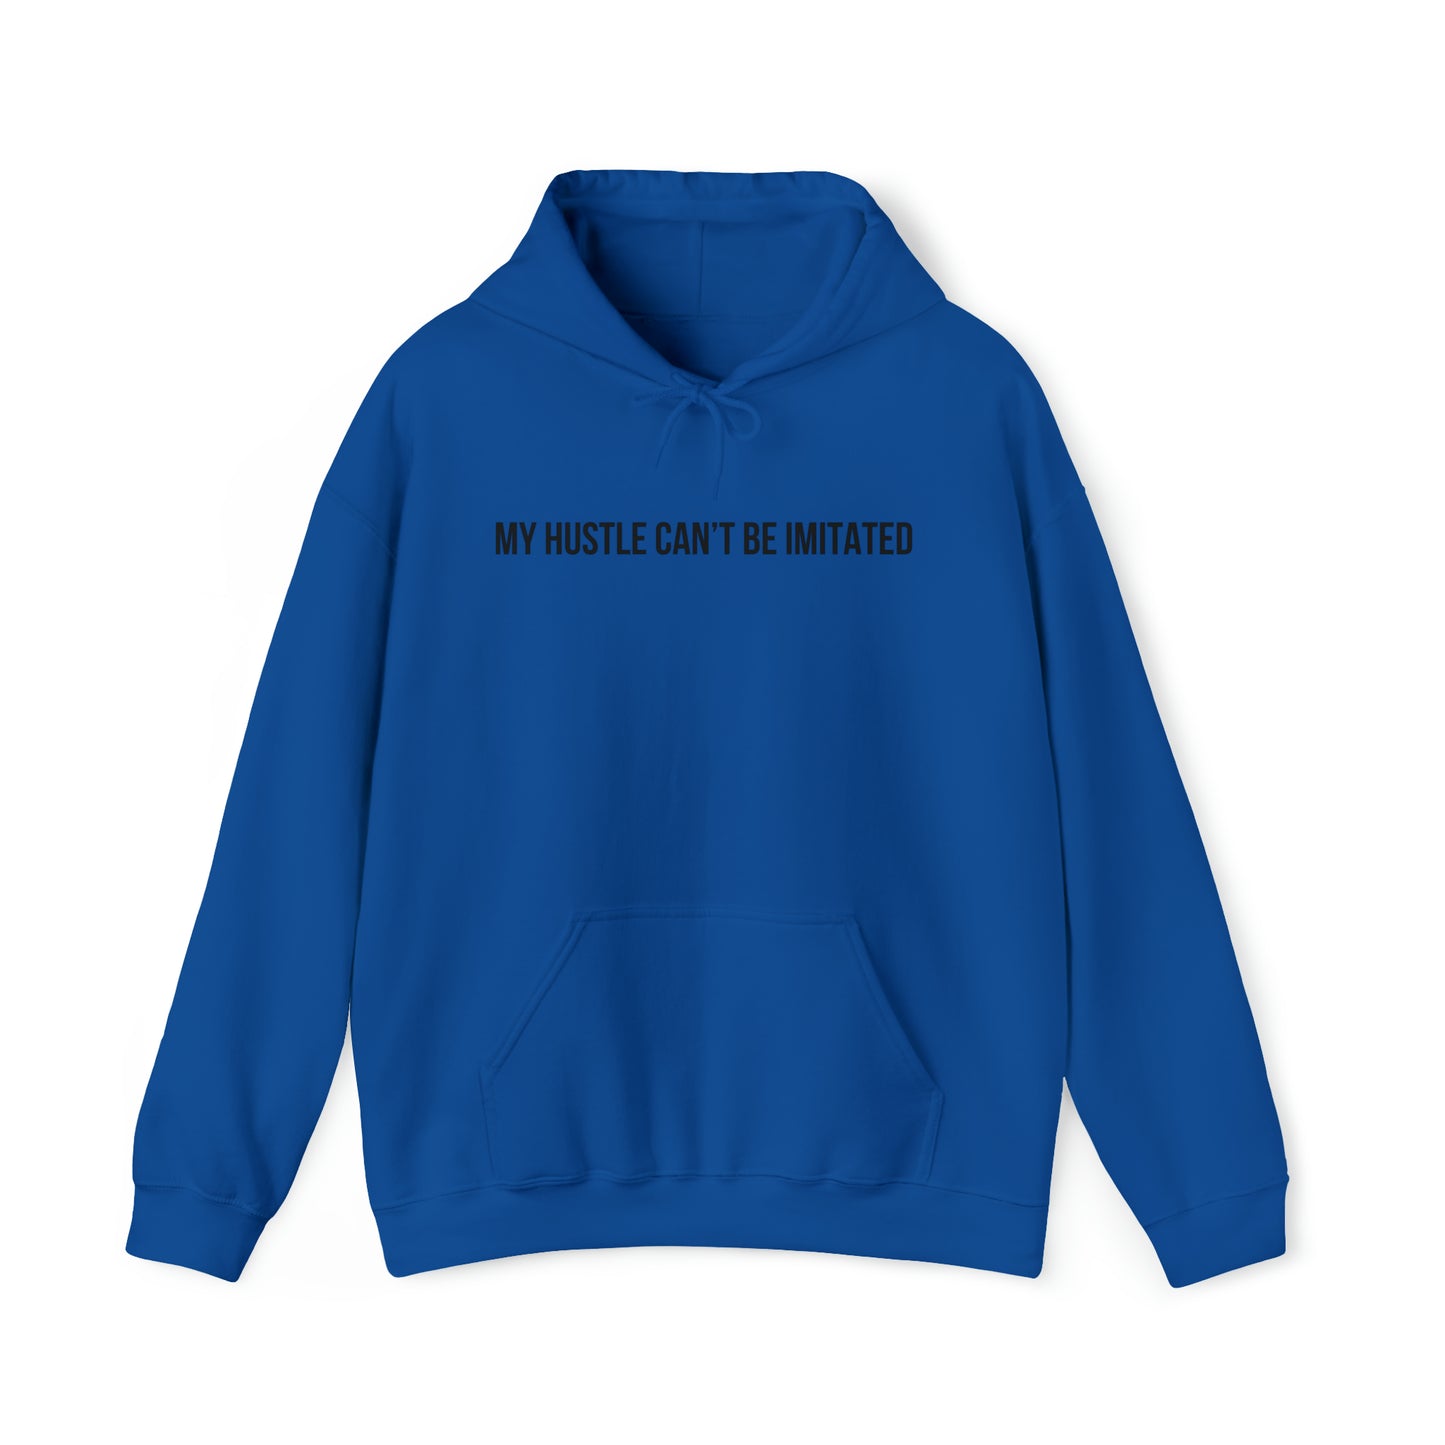 My Hustle Can't Be Imitated Heavy Blend™ Hooded Sweatshirt